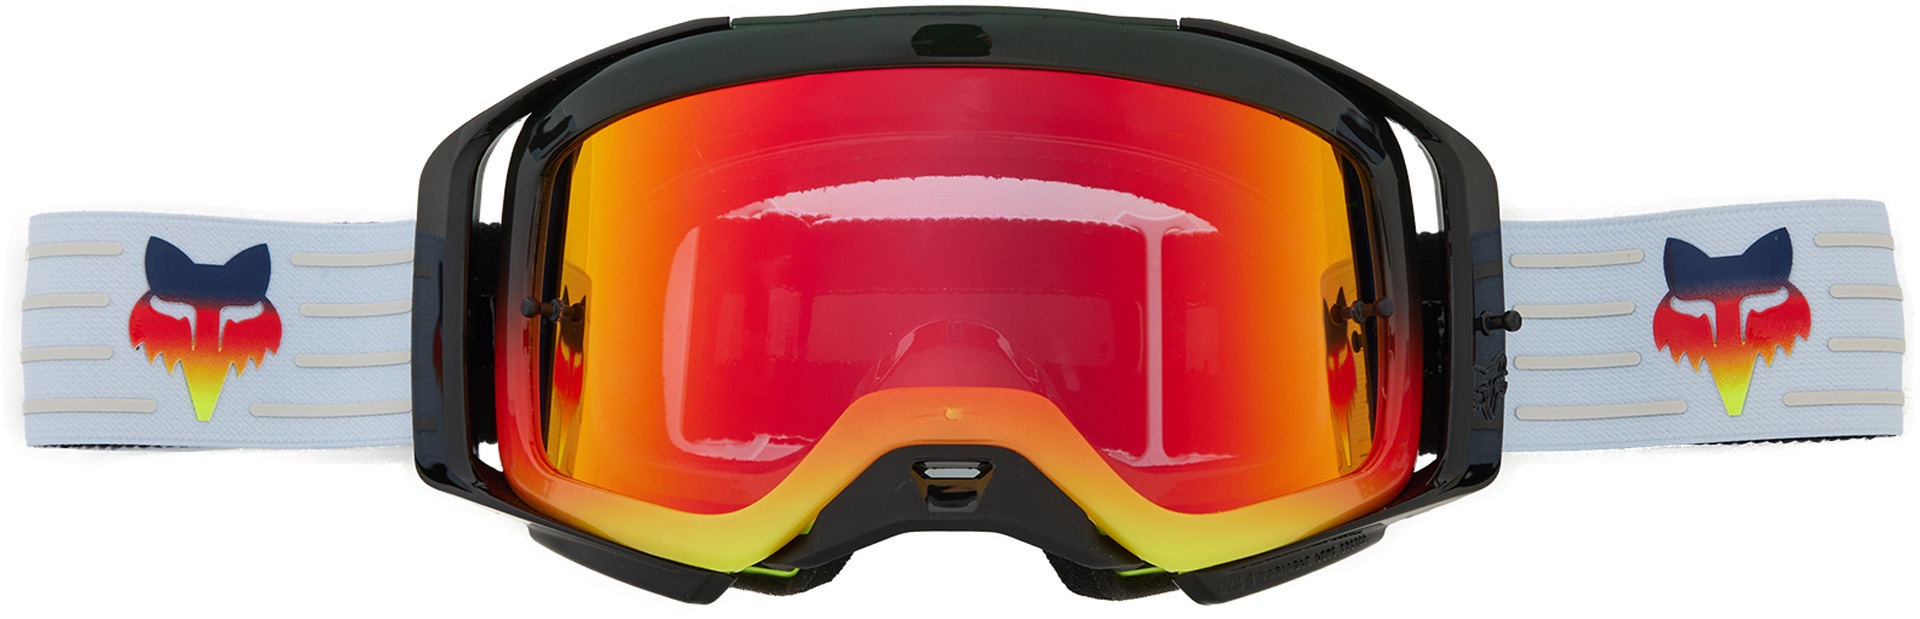 FOX Airspace Flora Motocross Brille, weiss